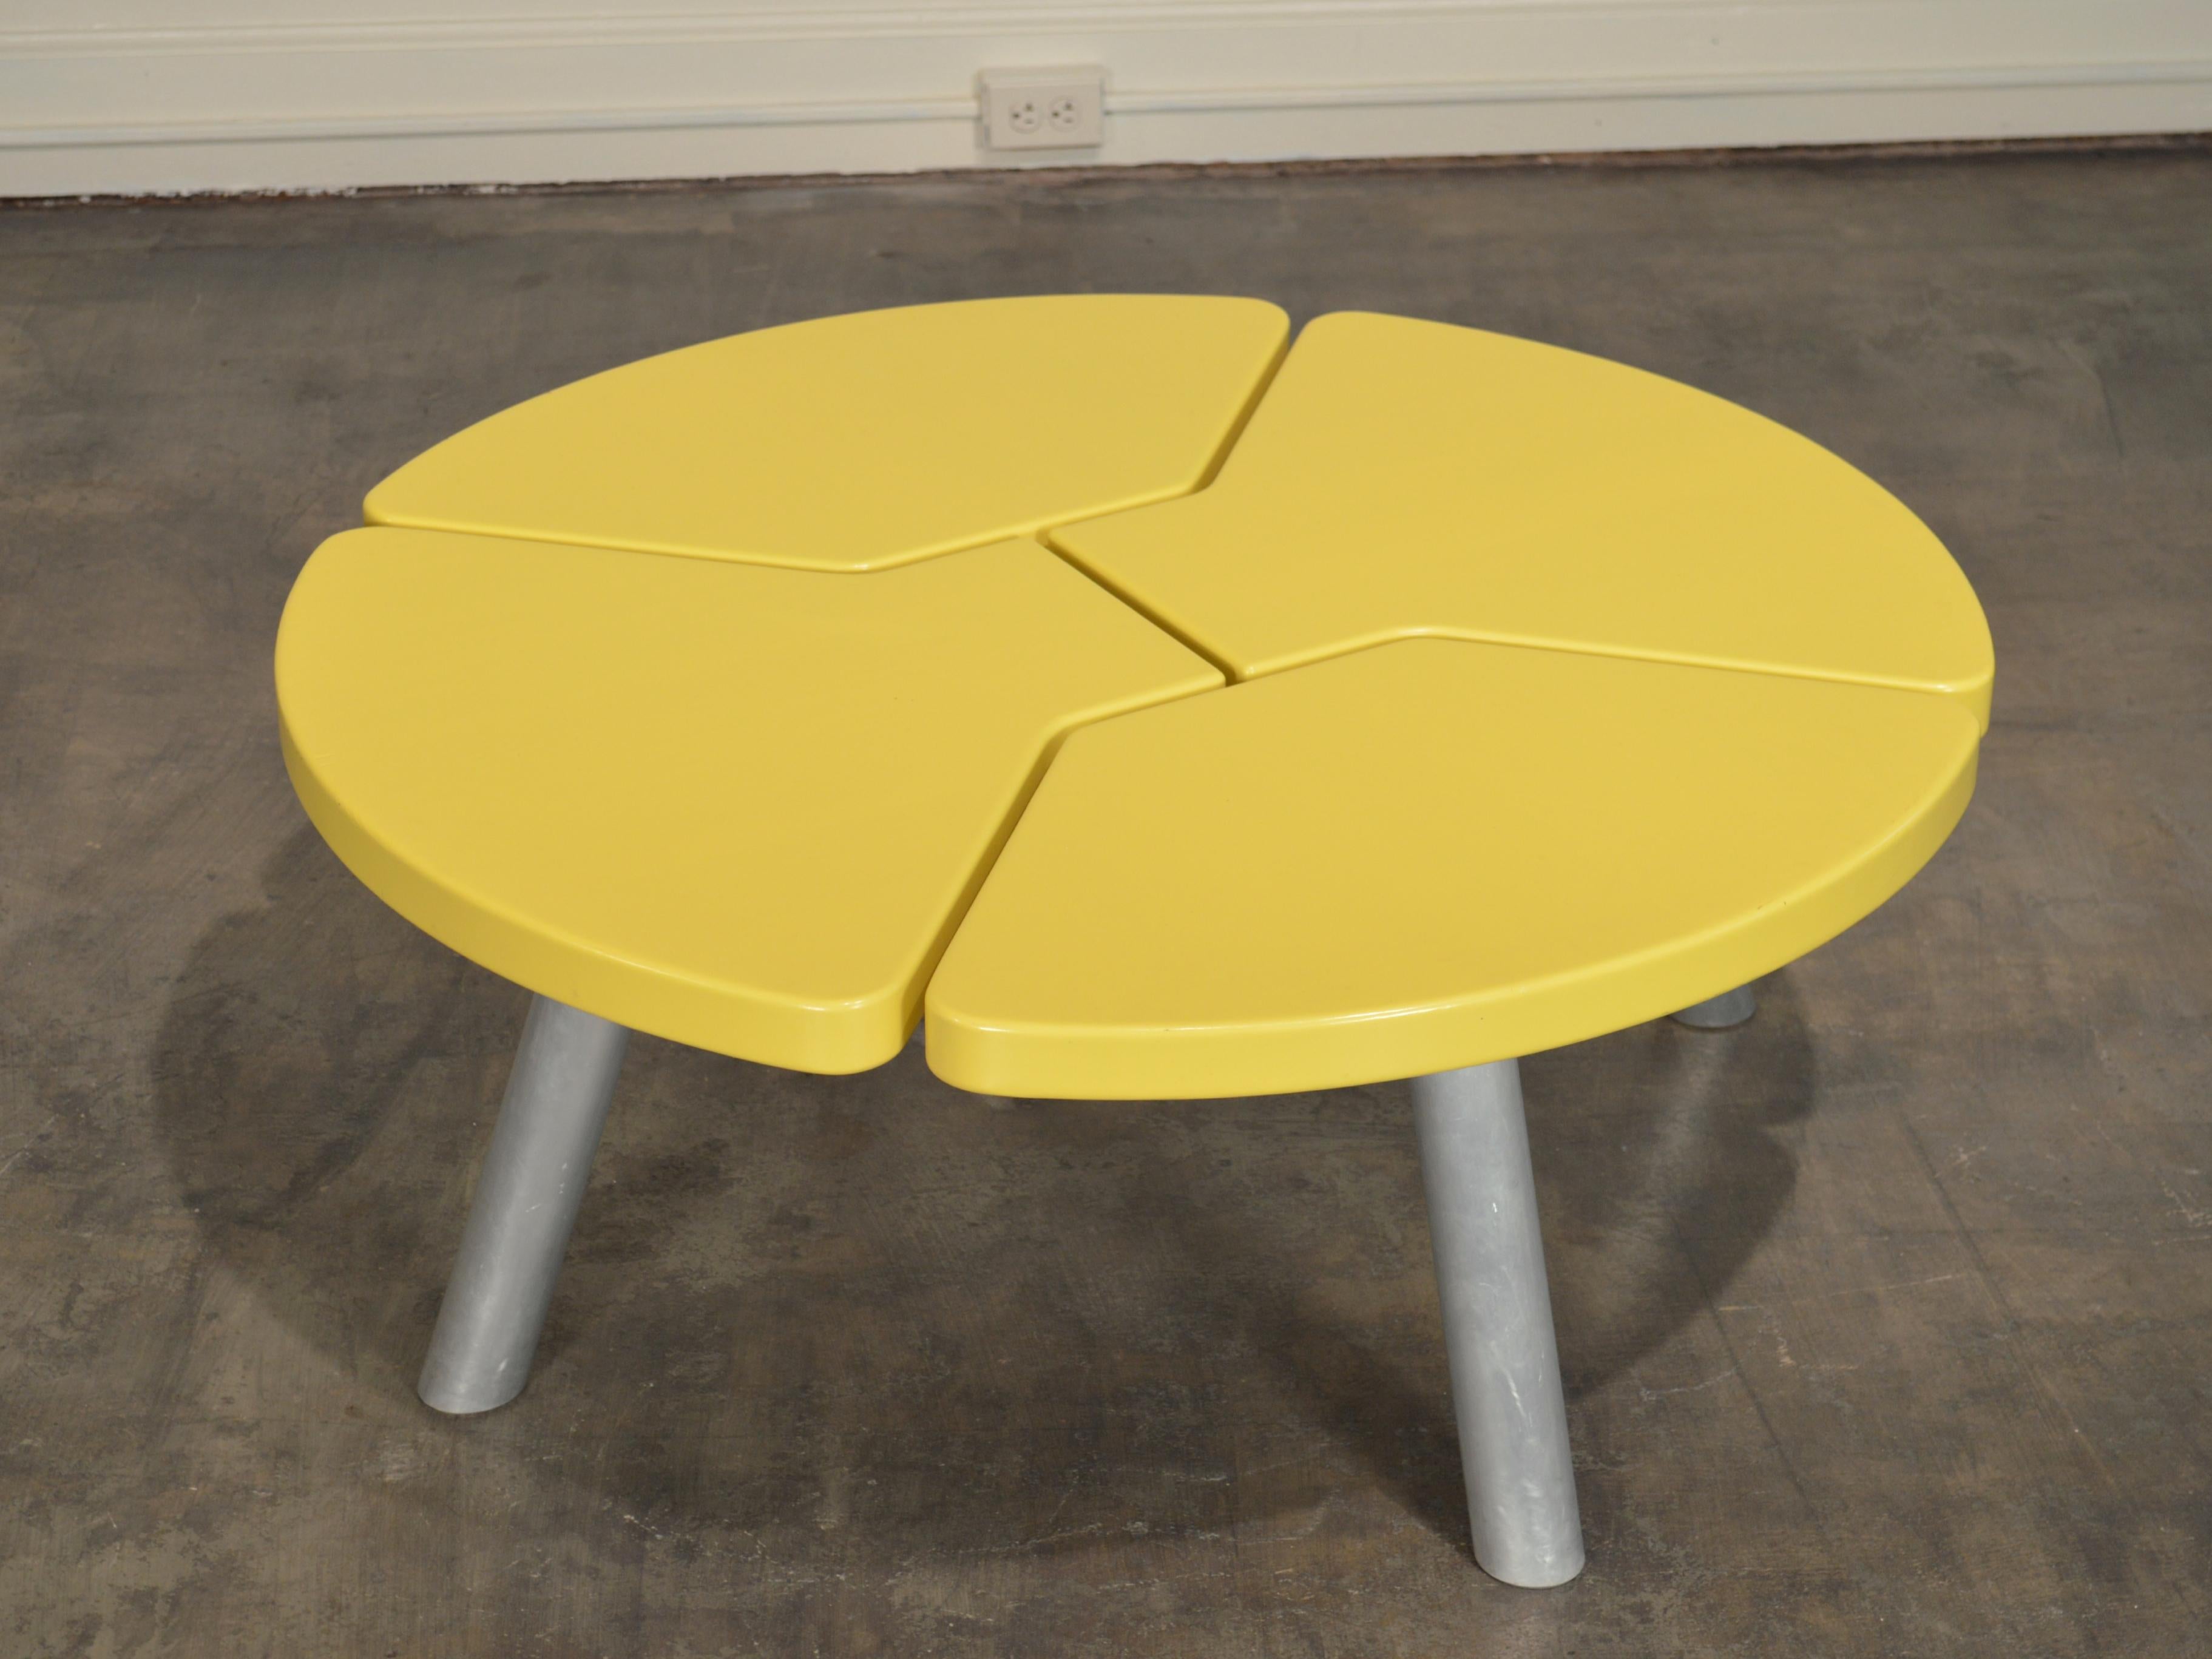 Angela Adams Mod Pod Coffee Table in Chartreuse In Good Condition For Sale In Portland, ME